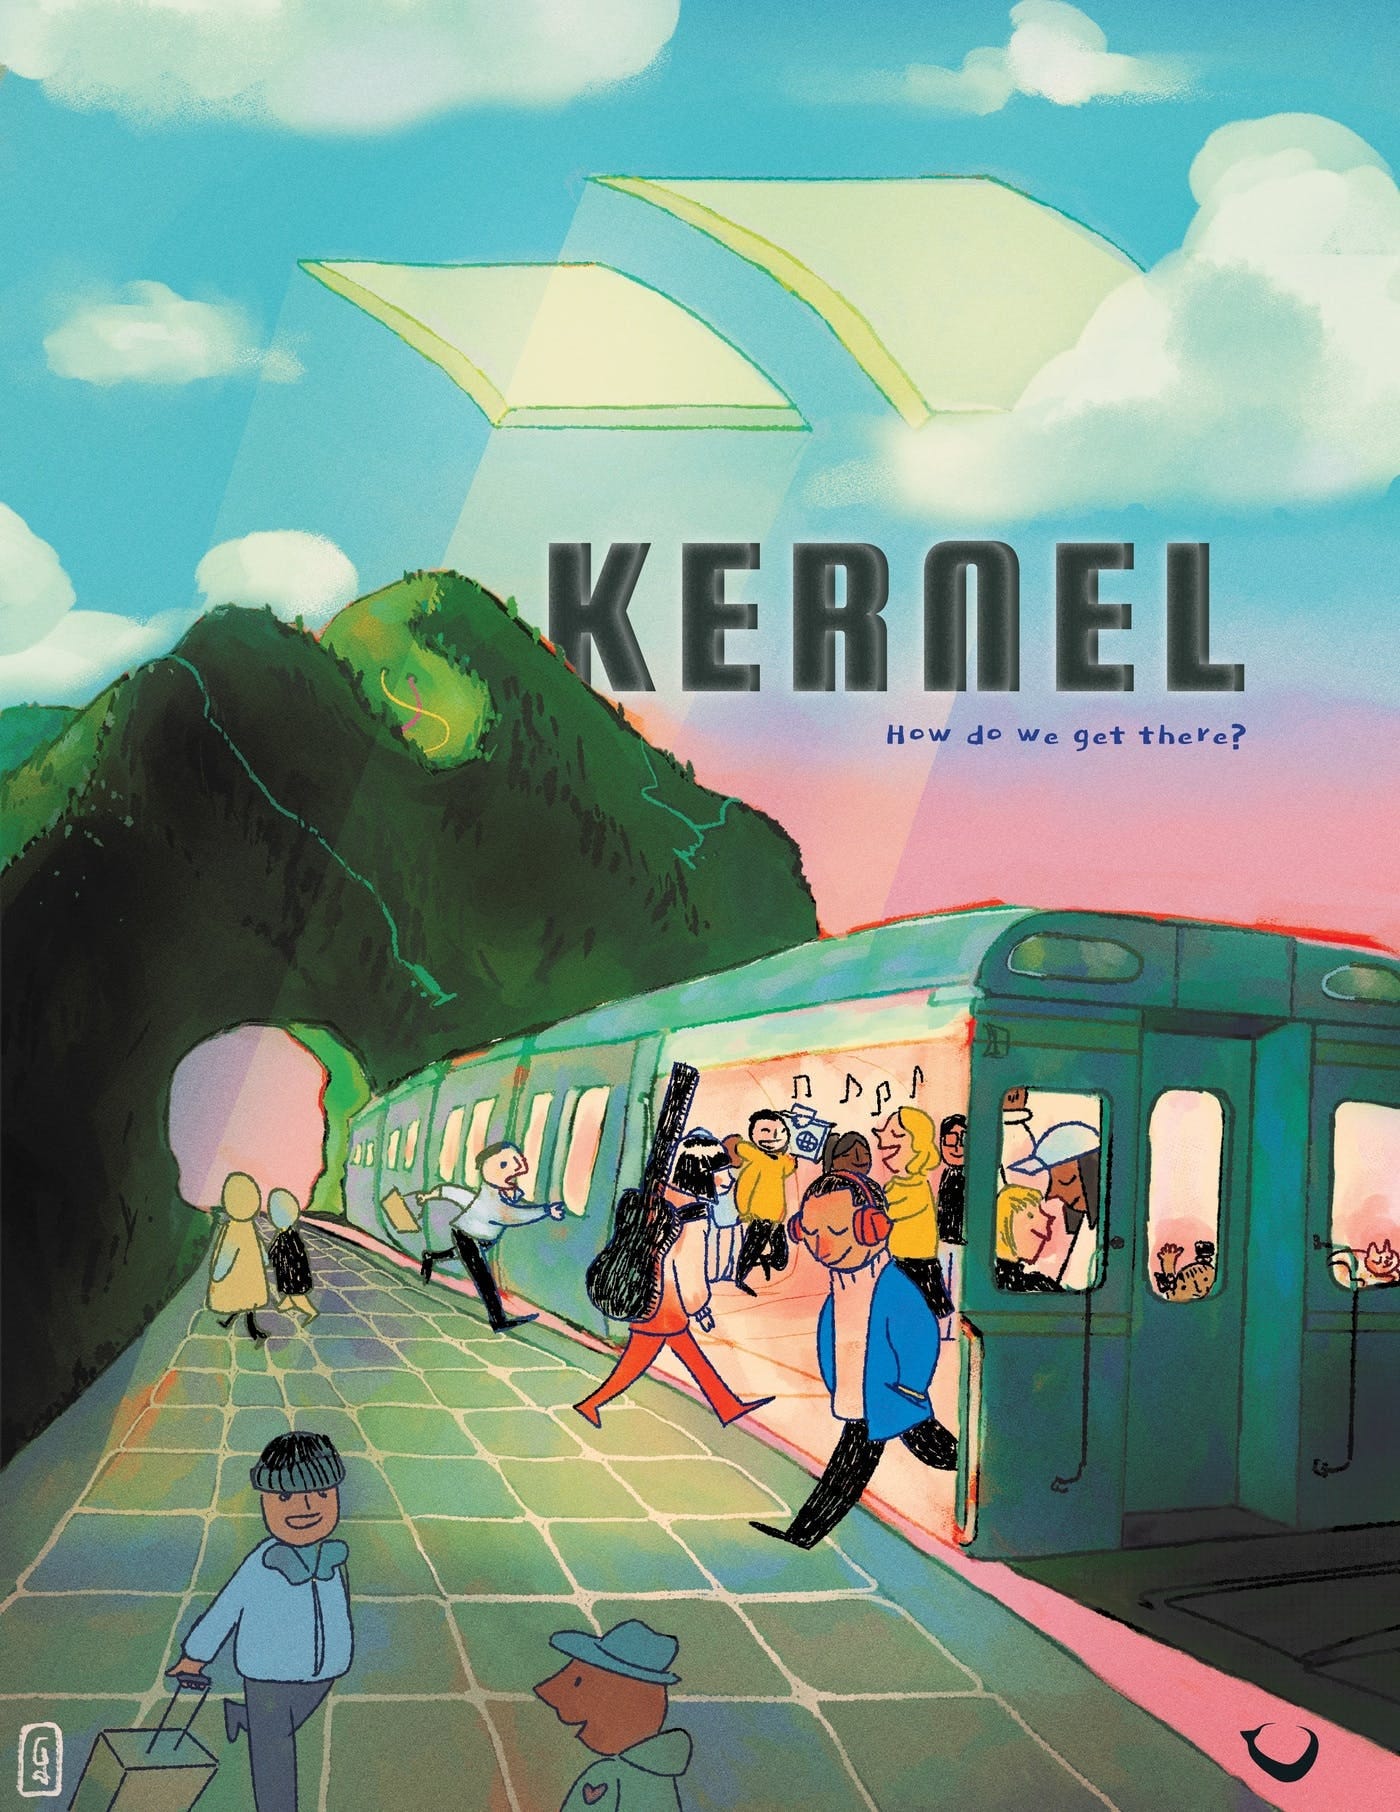 Cover of Kernel Magazine: How do we get there? Illustration of a train with happy people inside and mountains in the background